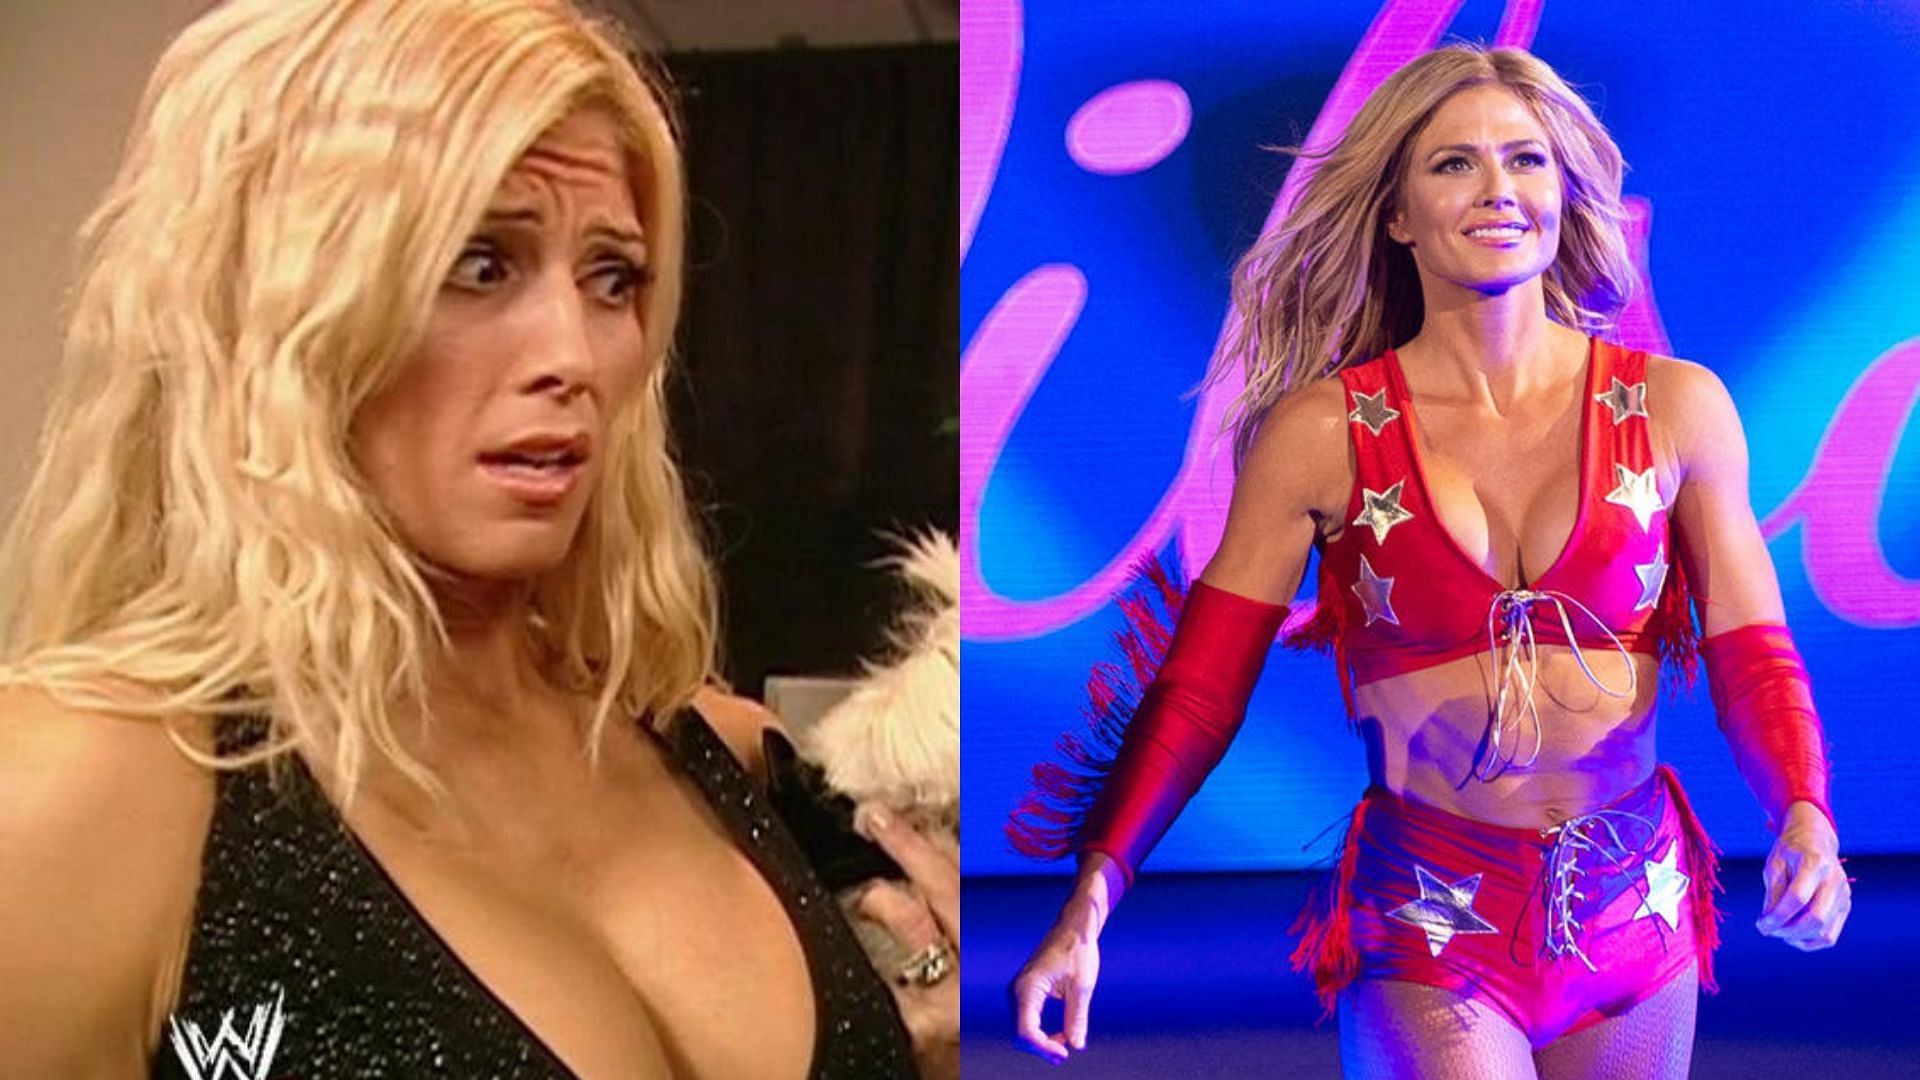 Torrie Wilson was one of the most prominent female wrestlers of her time